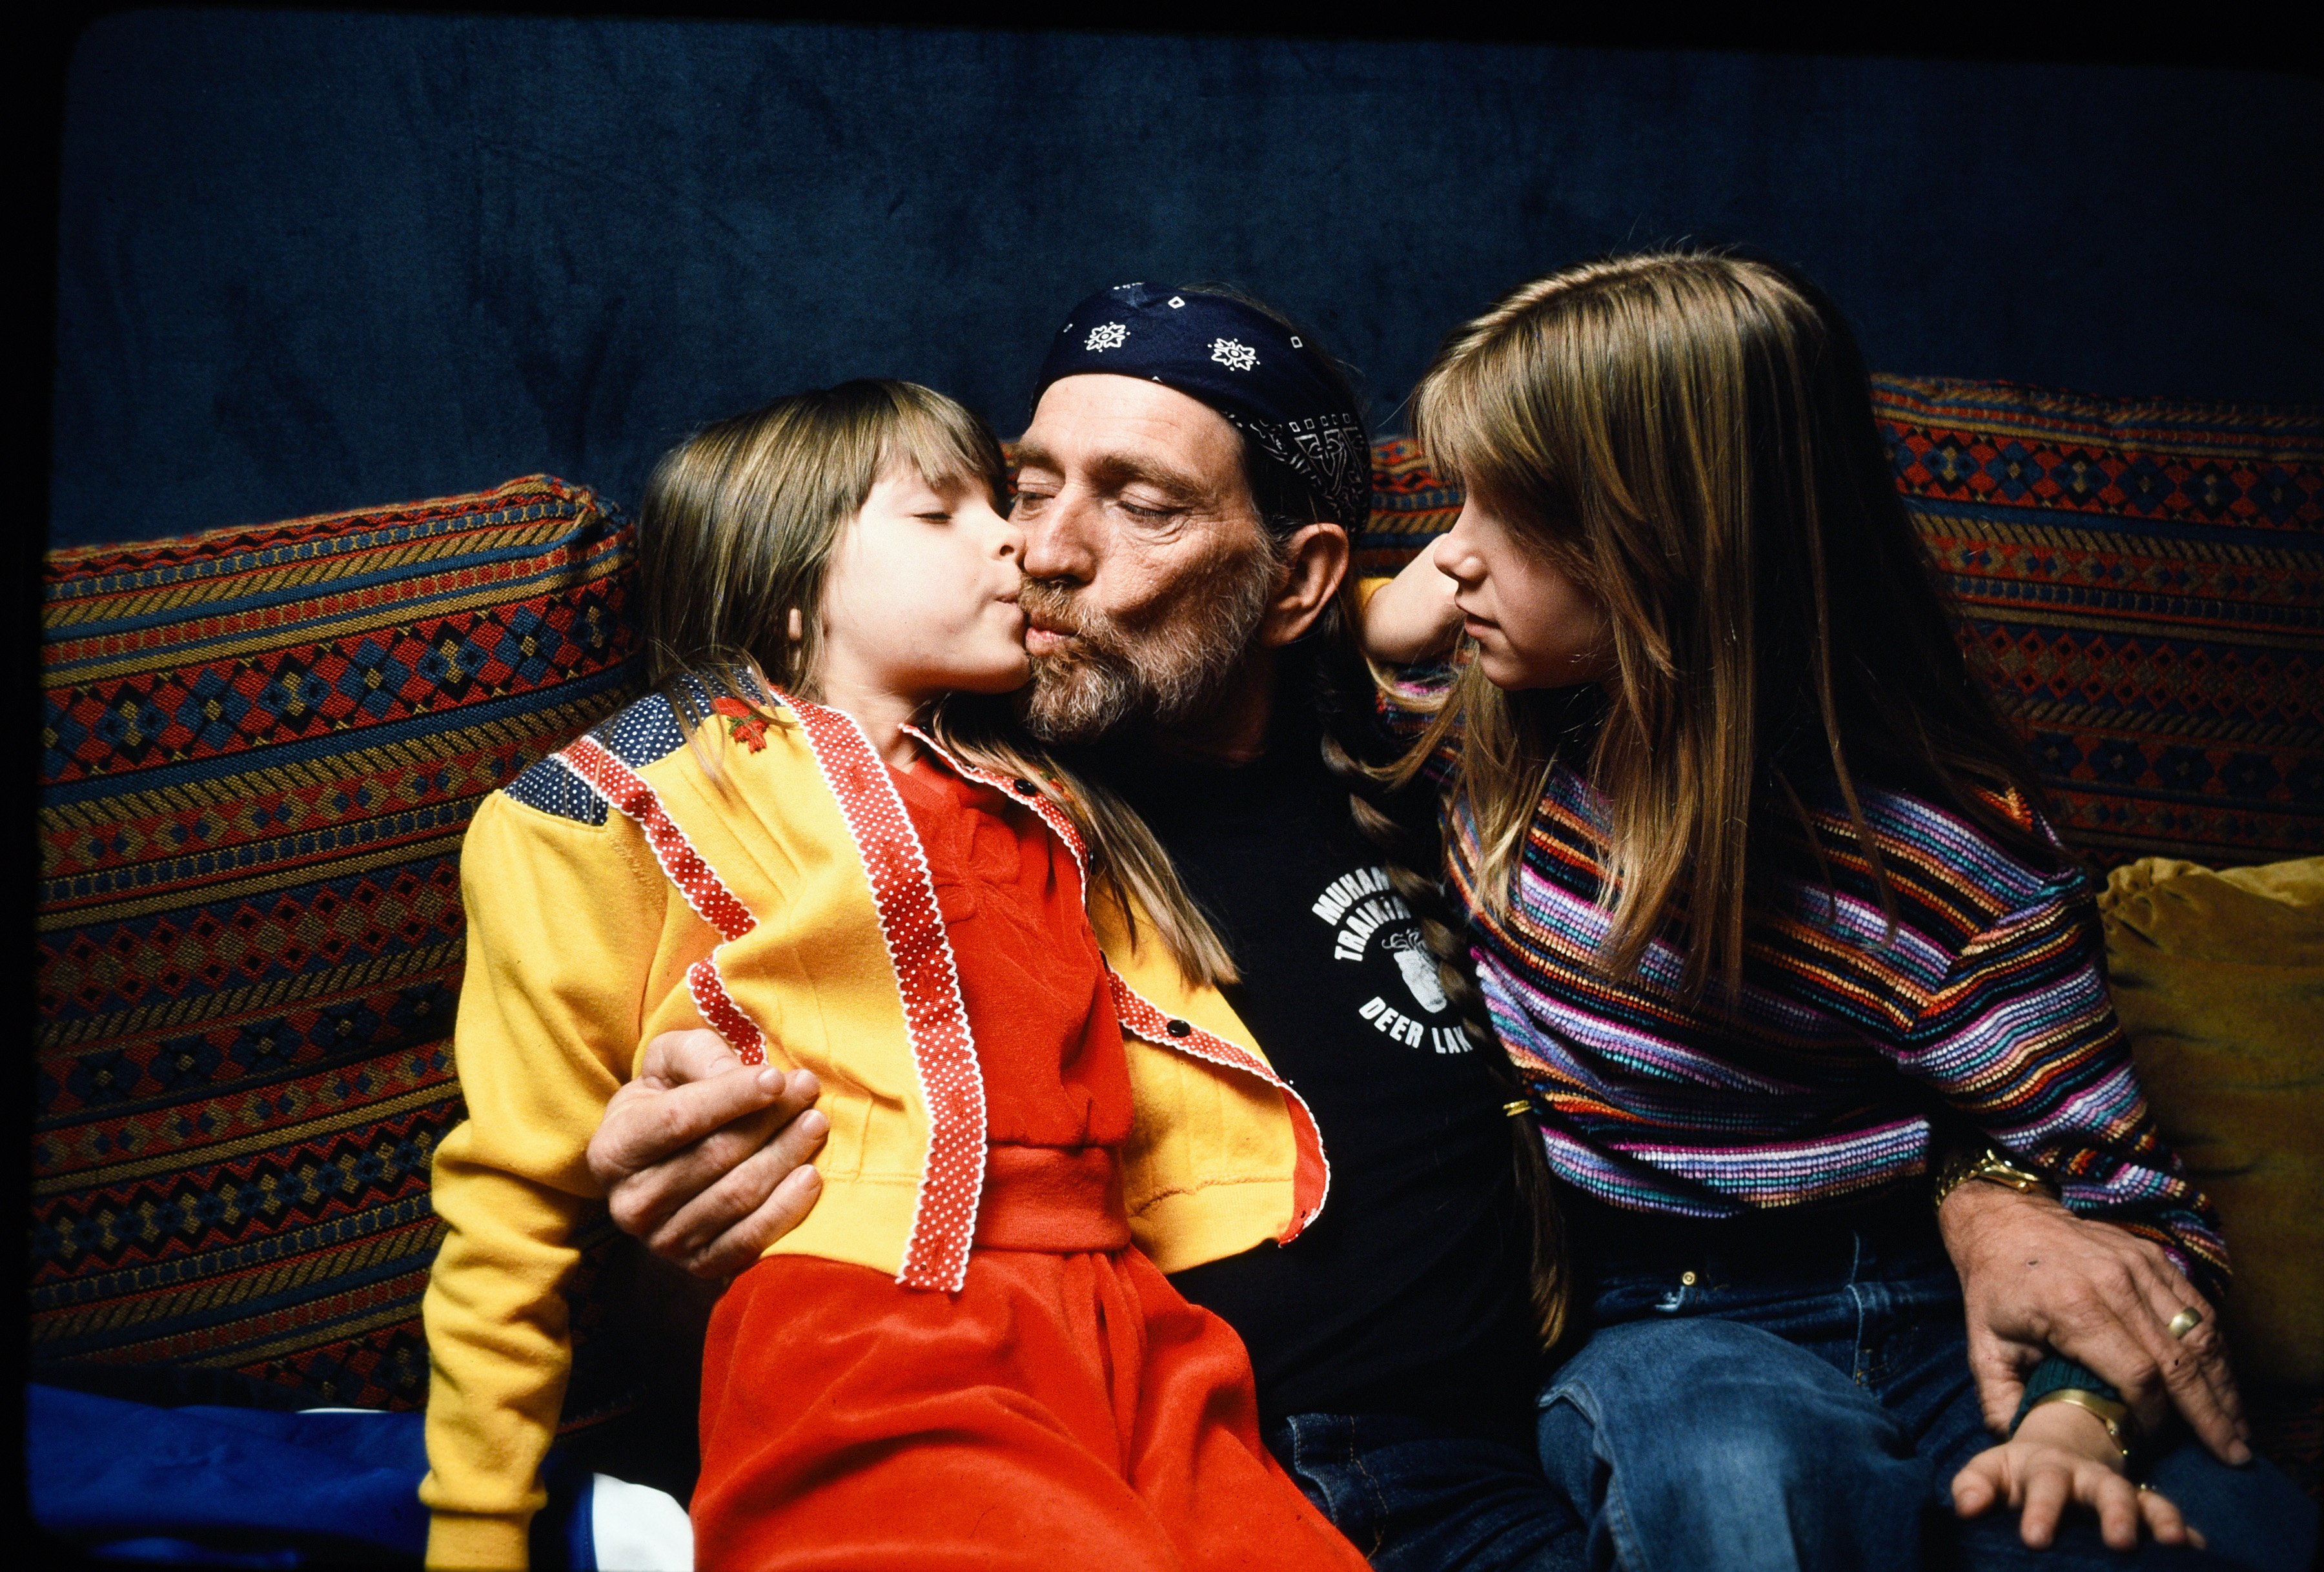 Willie Nelson with his daughters Paula Carlene and Amy Lee Willie Nelson has married four times and fathered seven children on June 18, 1980 in Las Vegas, Nevada | Source: Getty Images